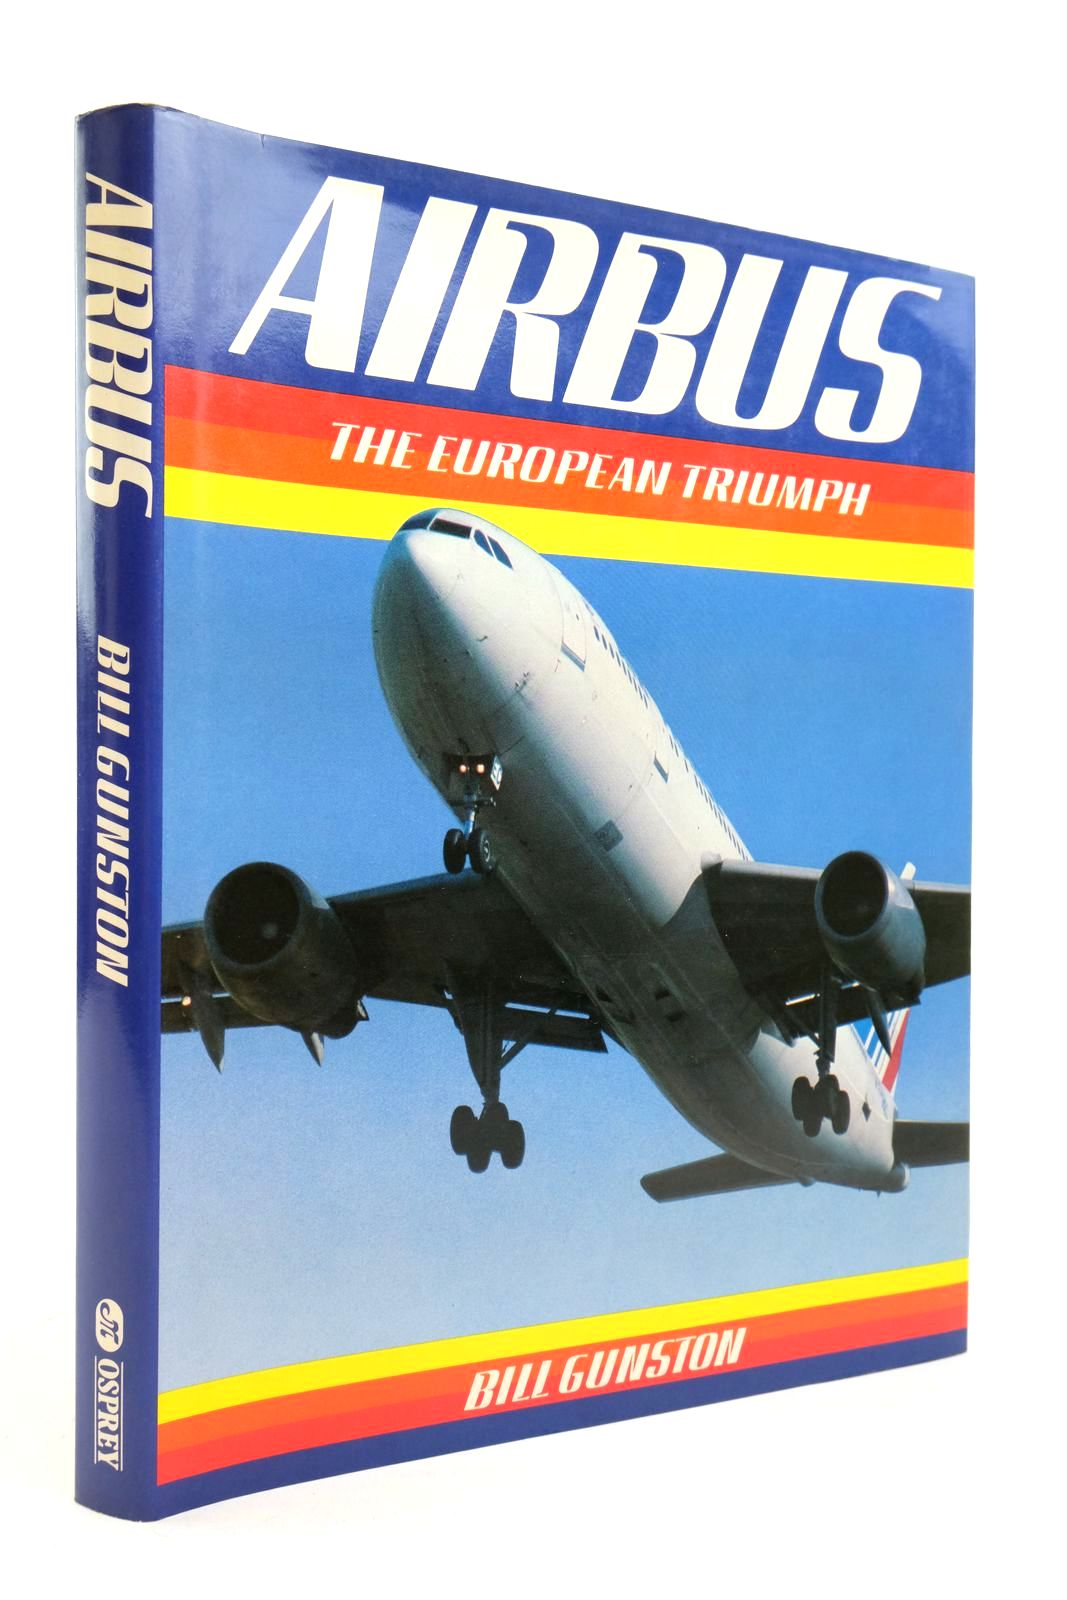 Photo of AIRBUS: THE EUROPEAN TRIUMPH written by Gunston, Bill published by Osprey Publishing (STOCK CODE: 2139841)  for sale by Stella & Rose's Books